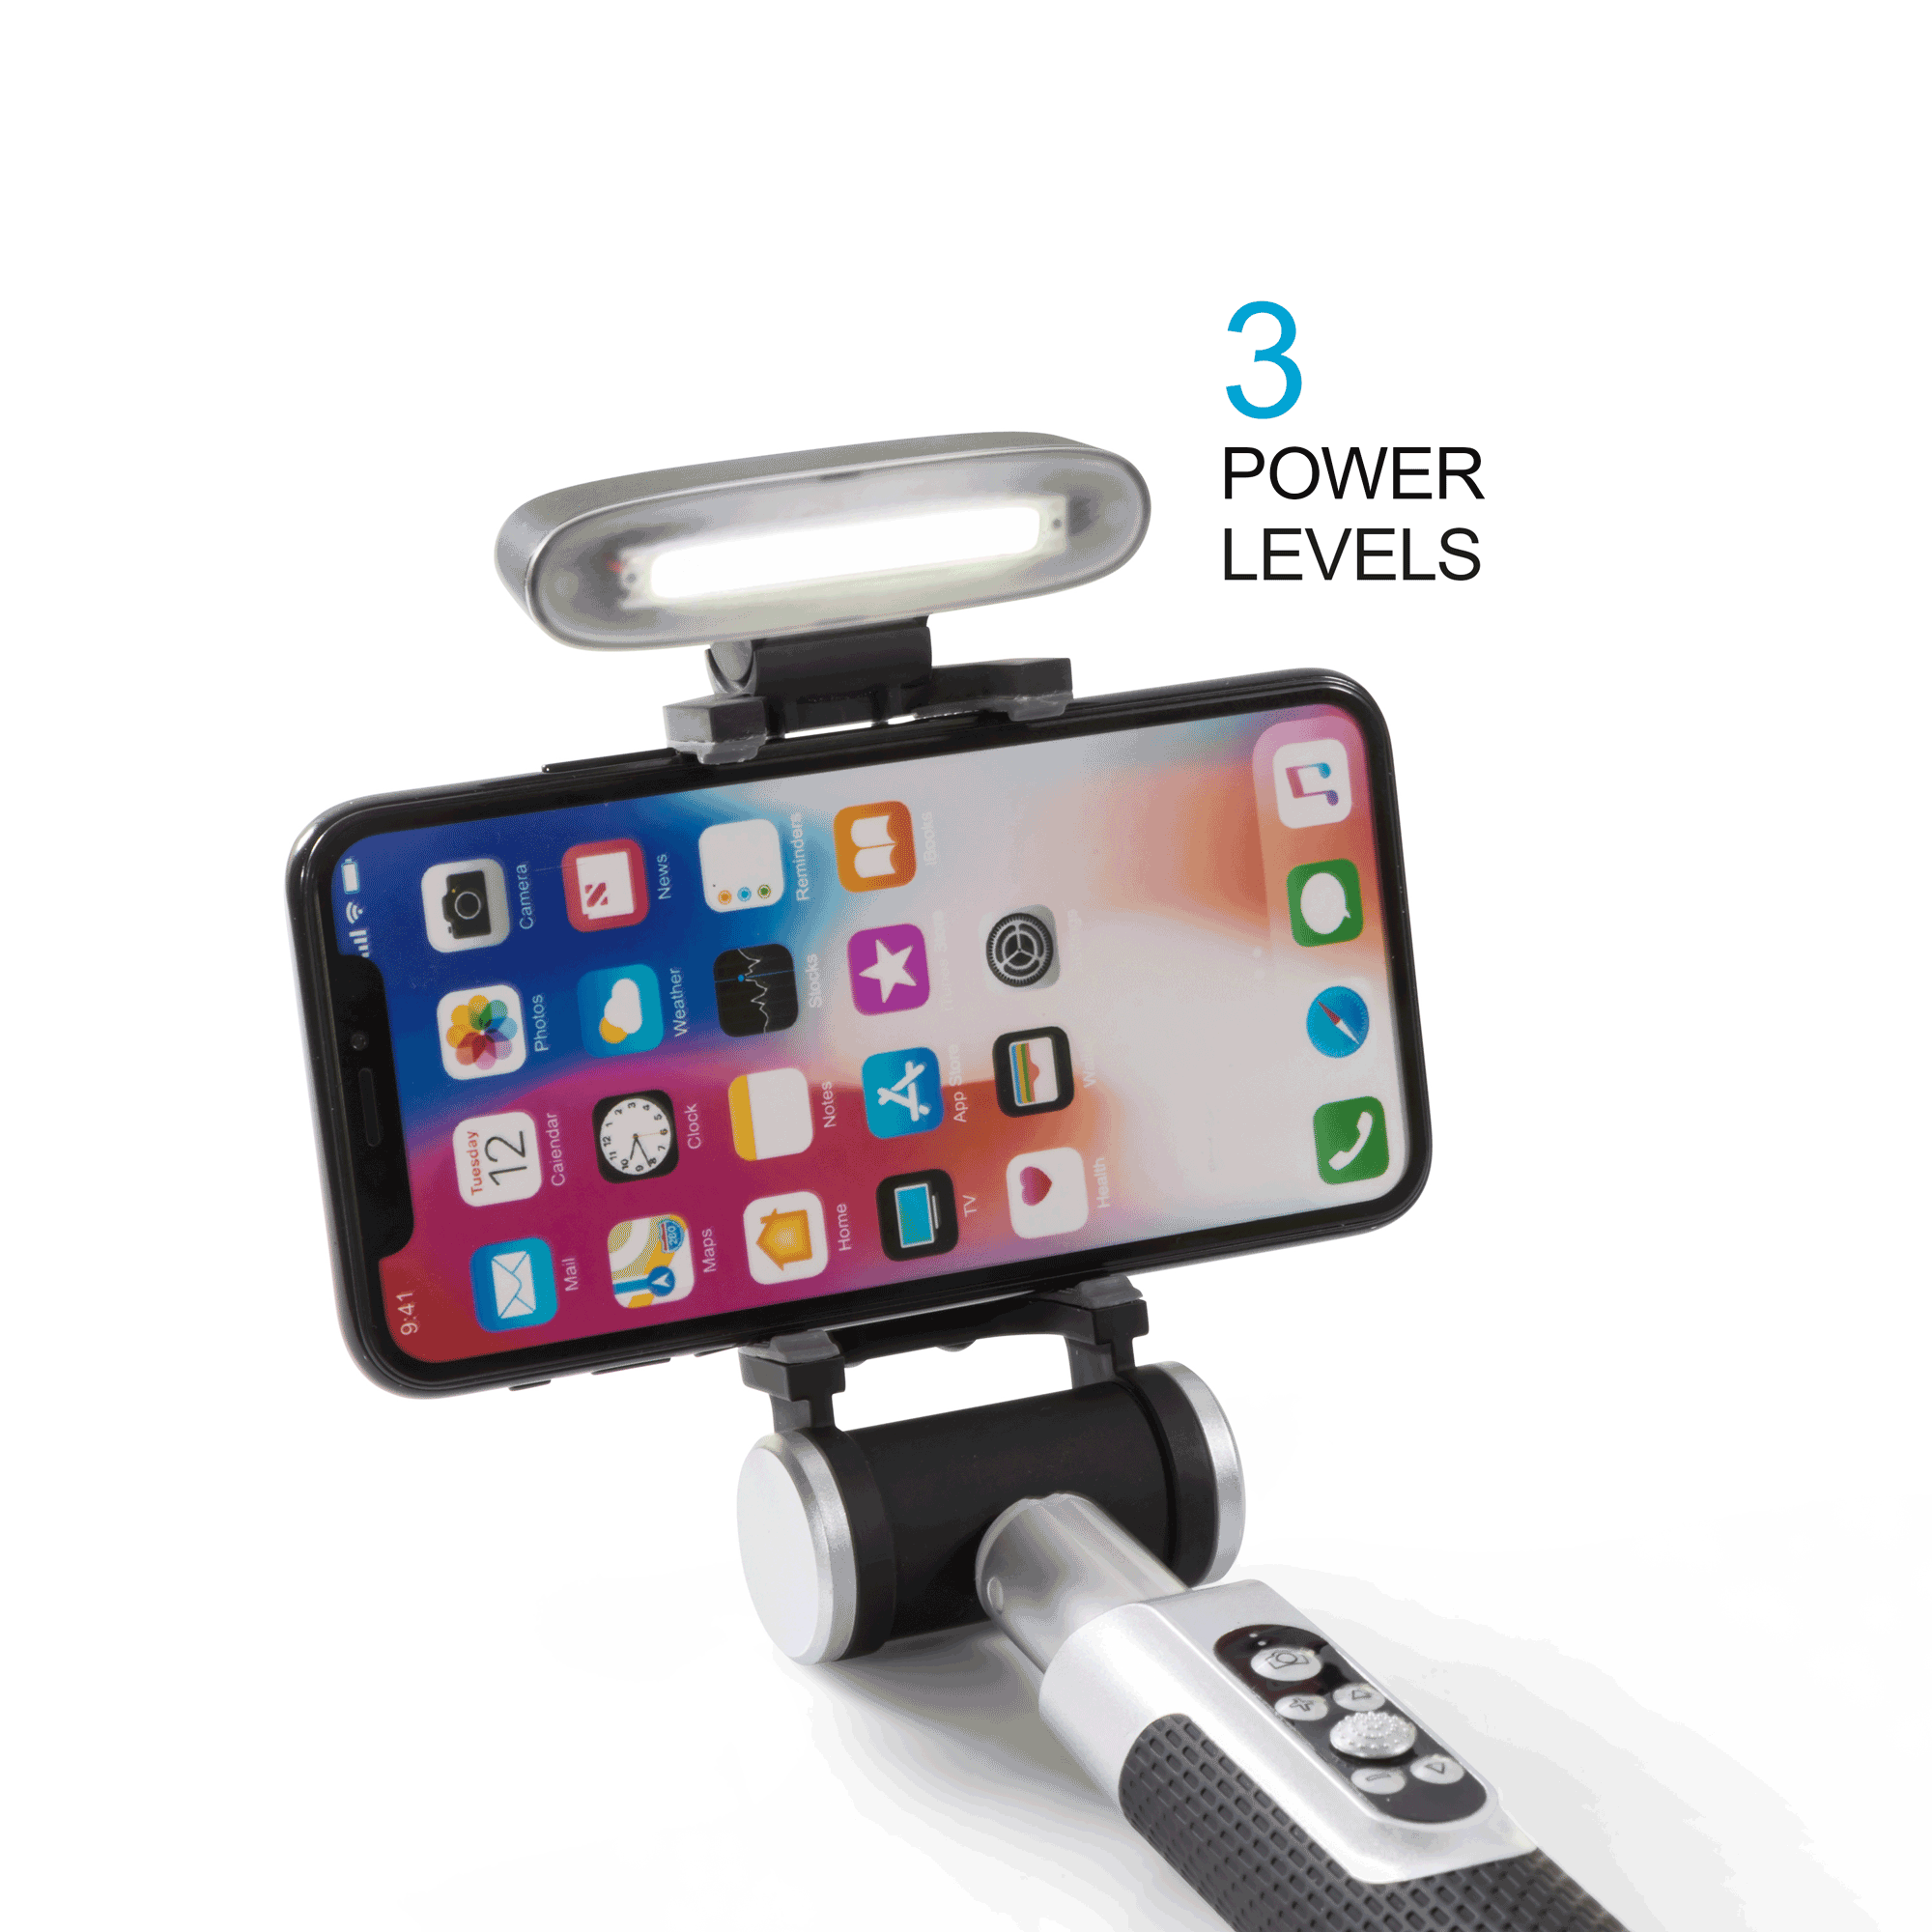 Pictar Smart-Light Selfie Stick: a new solution for smartphone vloggers 6